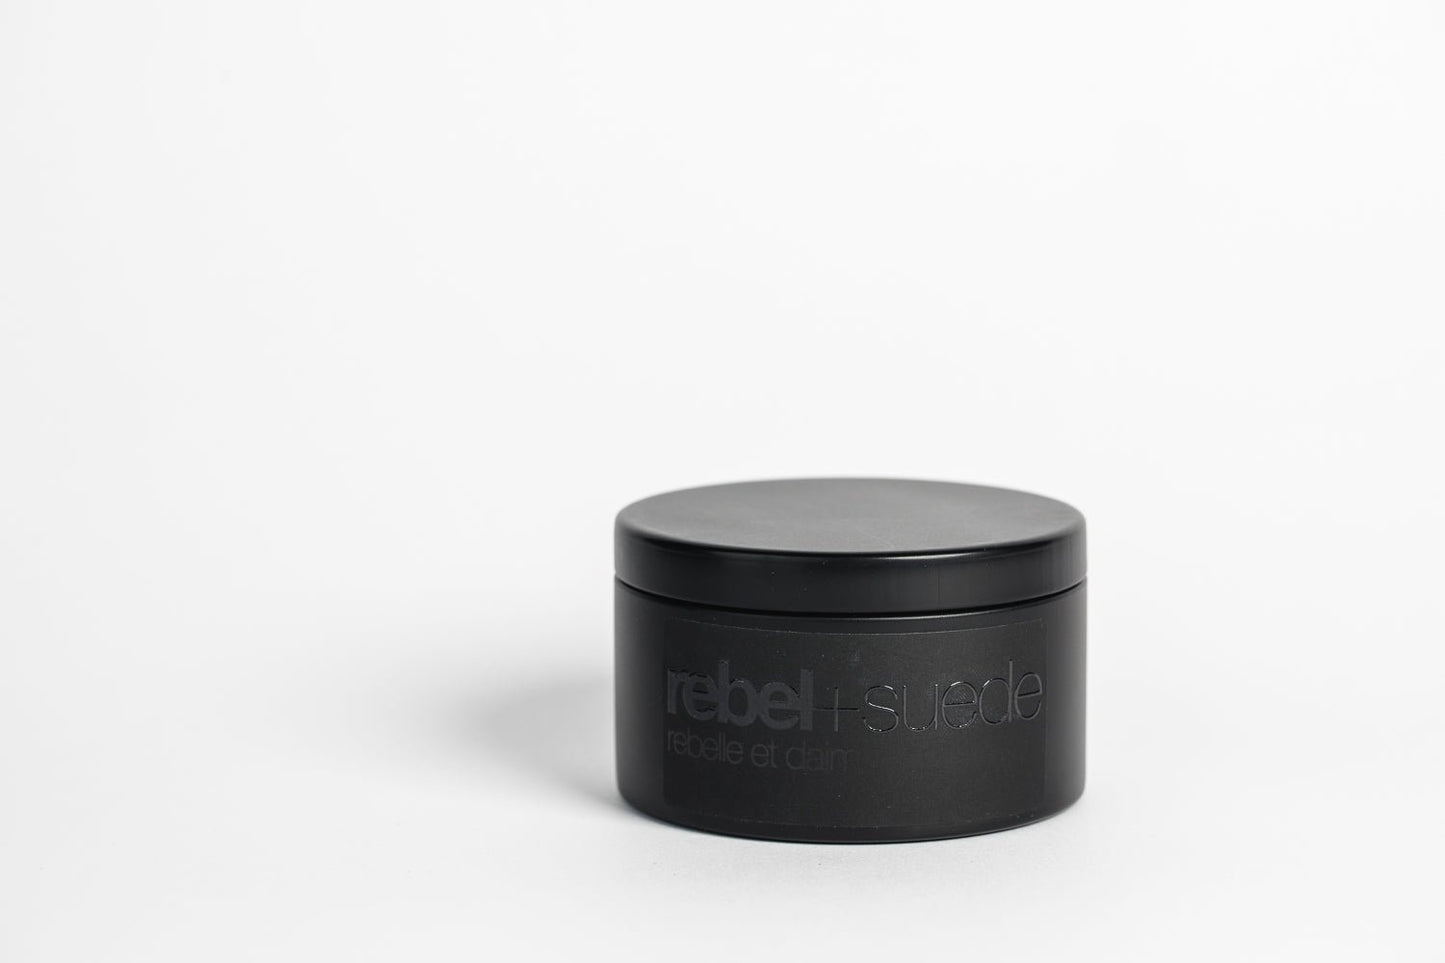 le gateau - rebel + suede | handcrafted candles | luxury candles